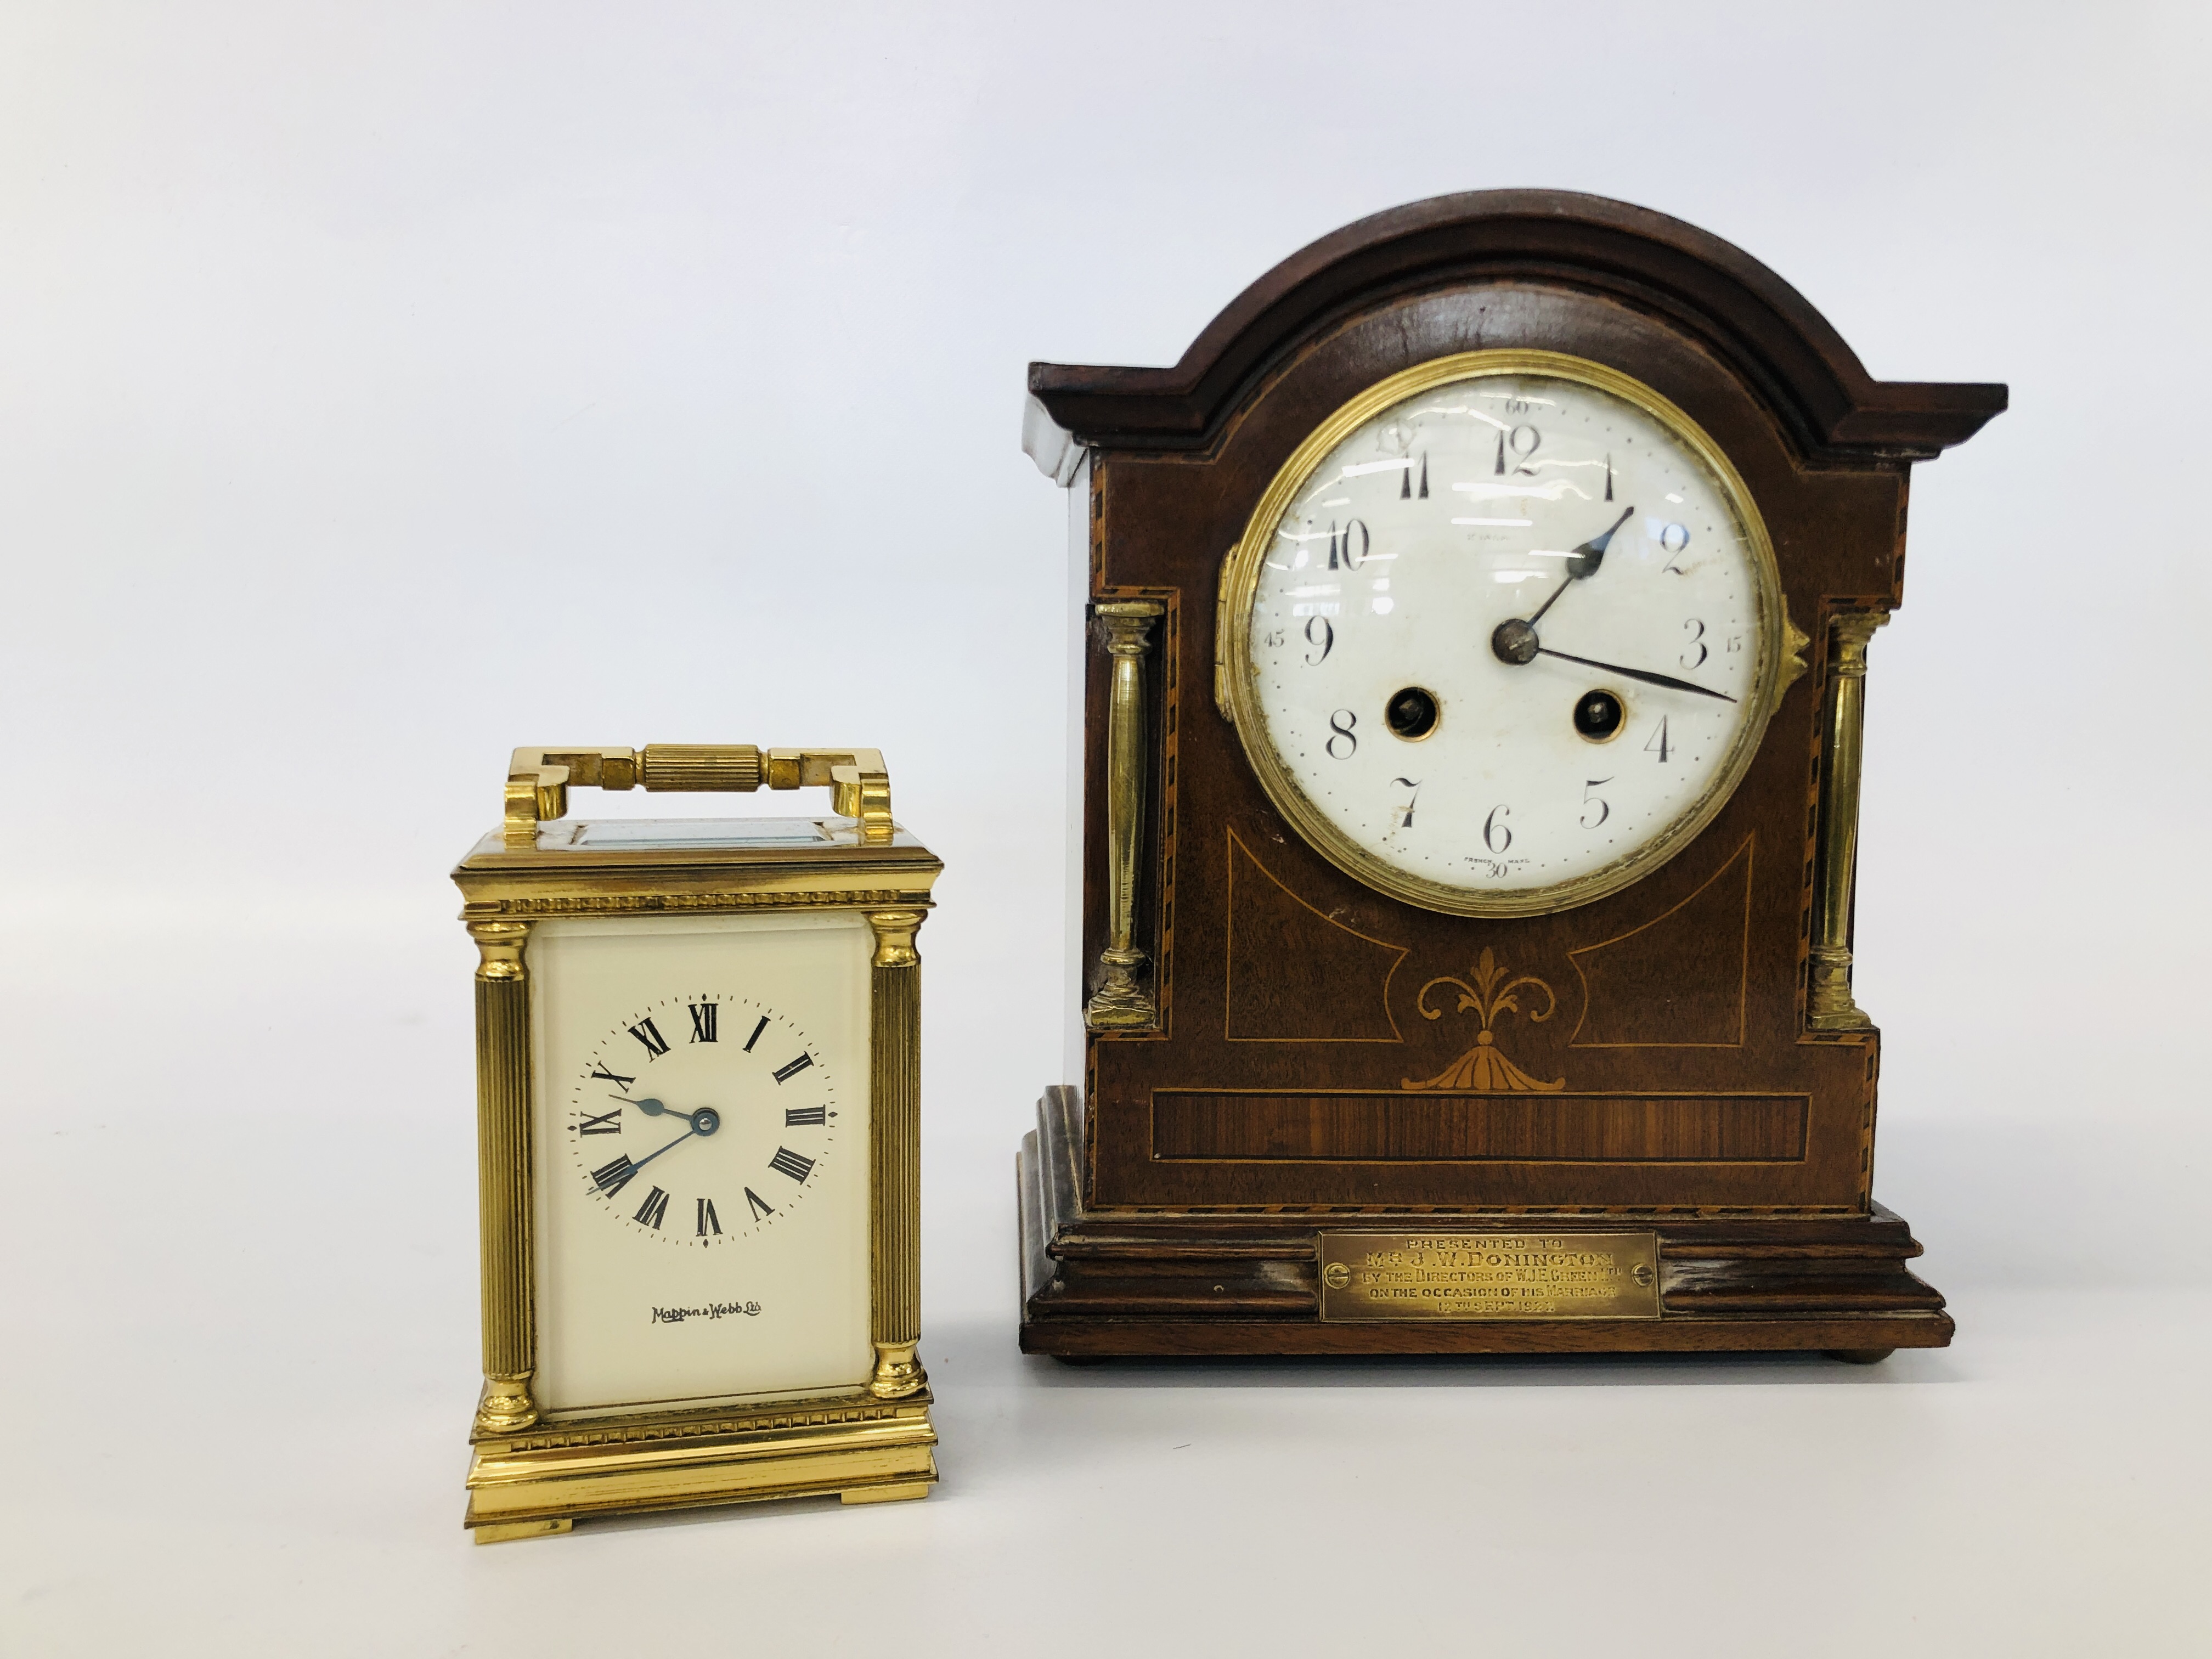 A BRASS MAPPIN & WEBB CARRIAGE CLOCK H 12CM, ALONG WITH MAHOGANY MANTEL CLOCK H 24CM.